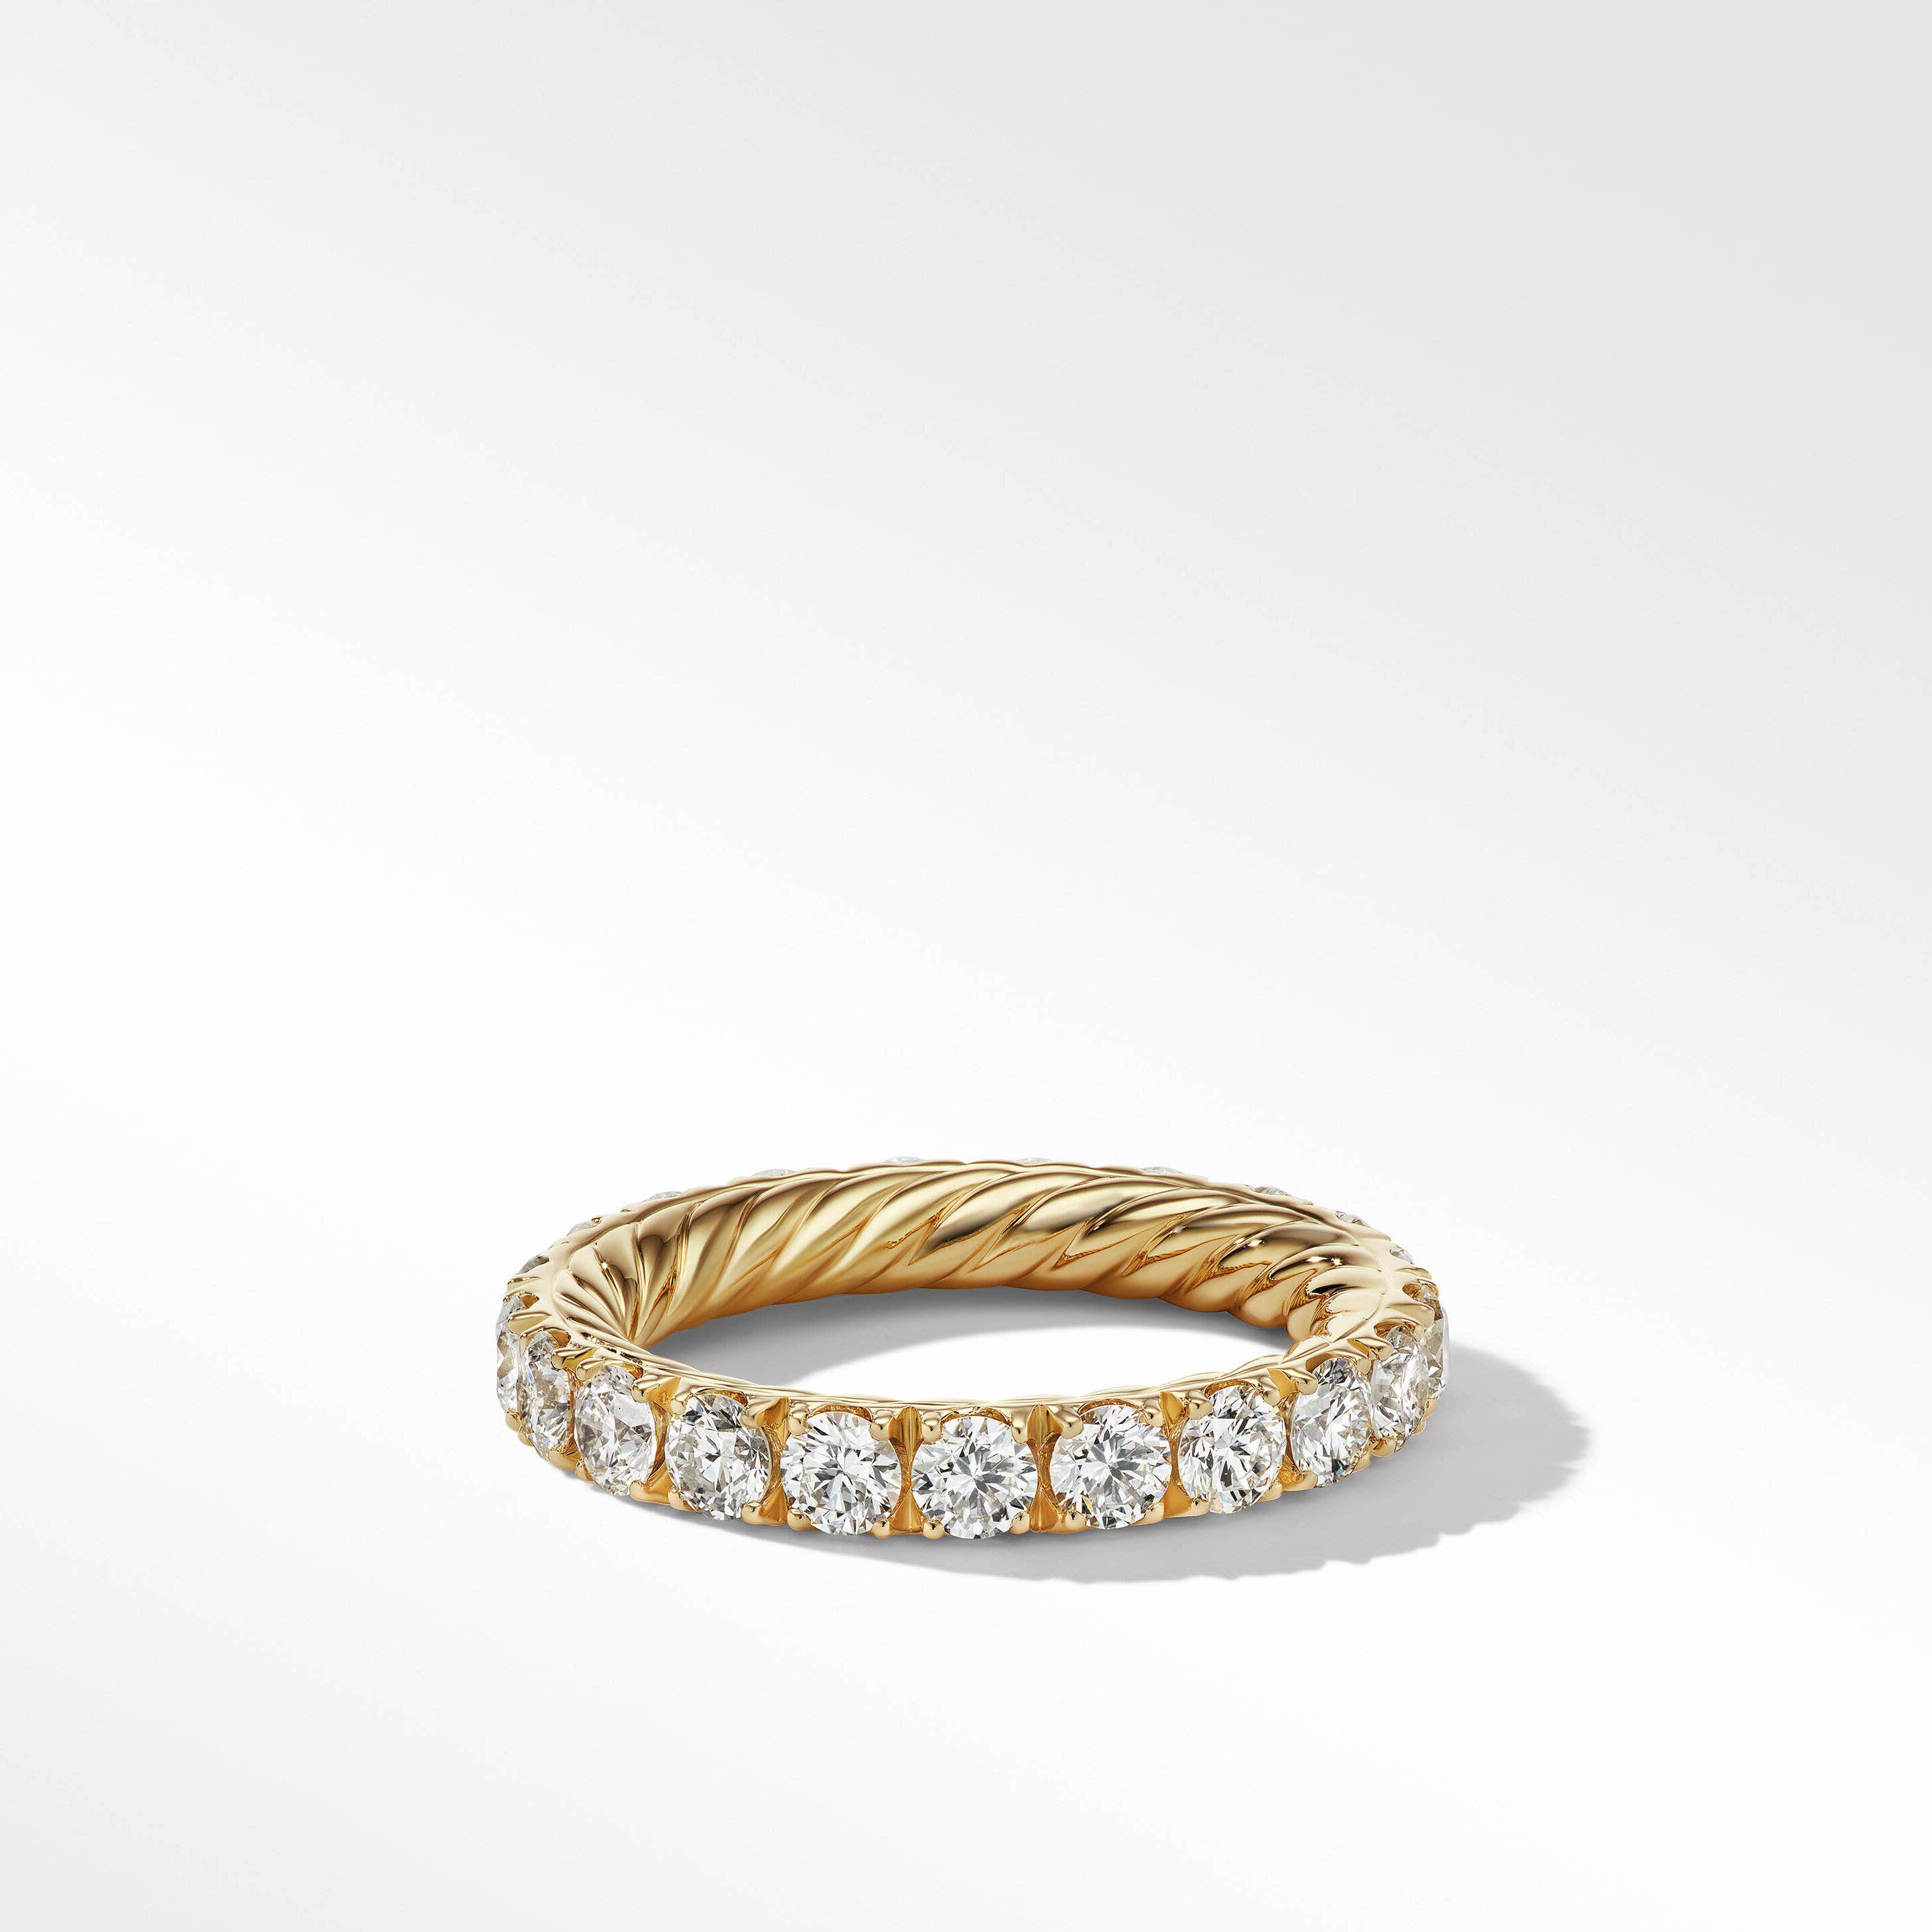 DY Eden Eternity Band Ring in 18K Yellow Gold with Diamonds